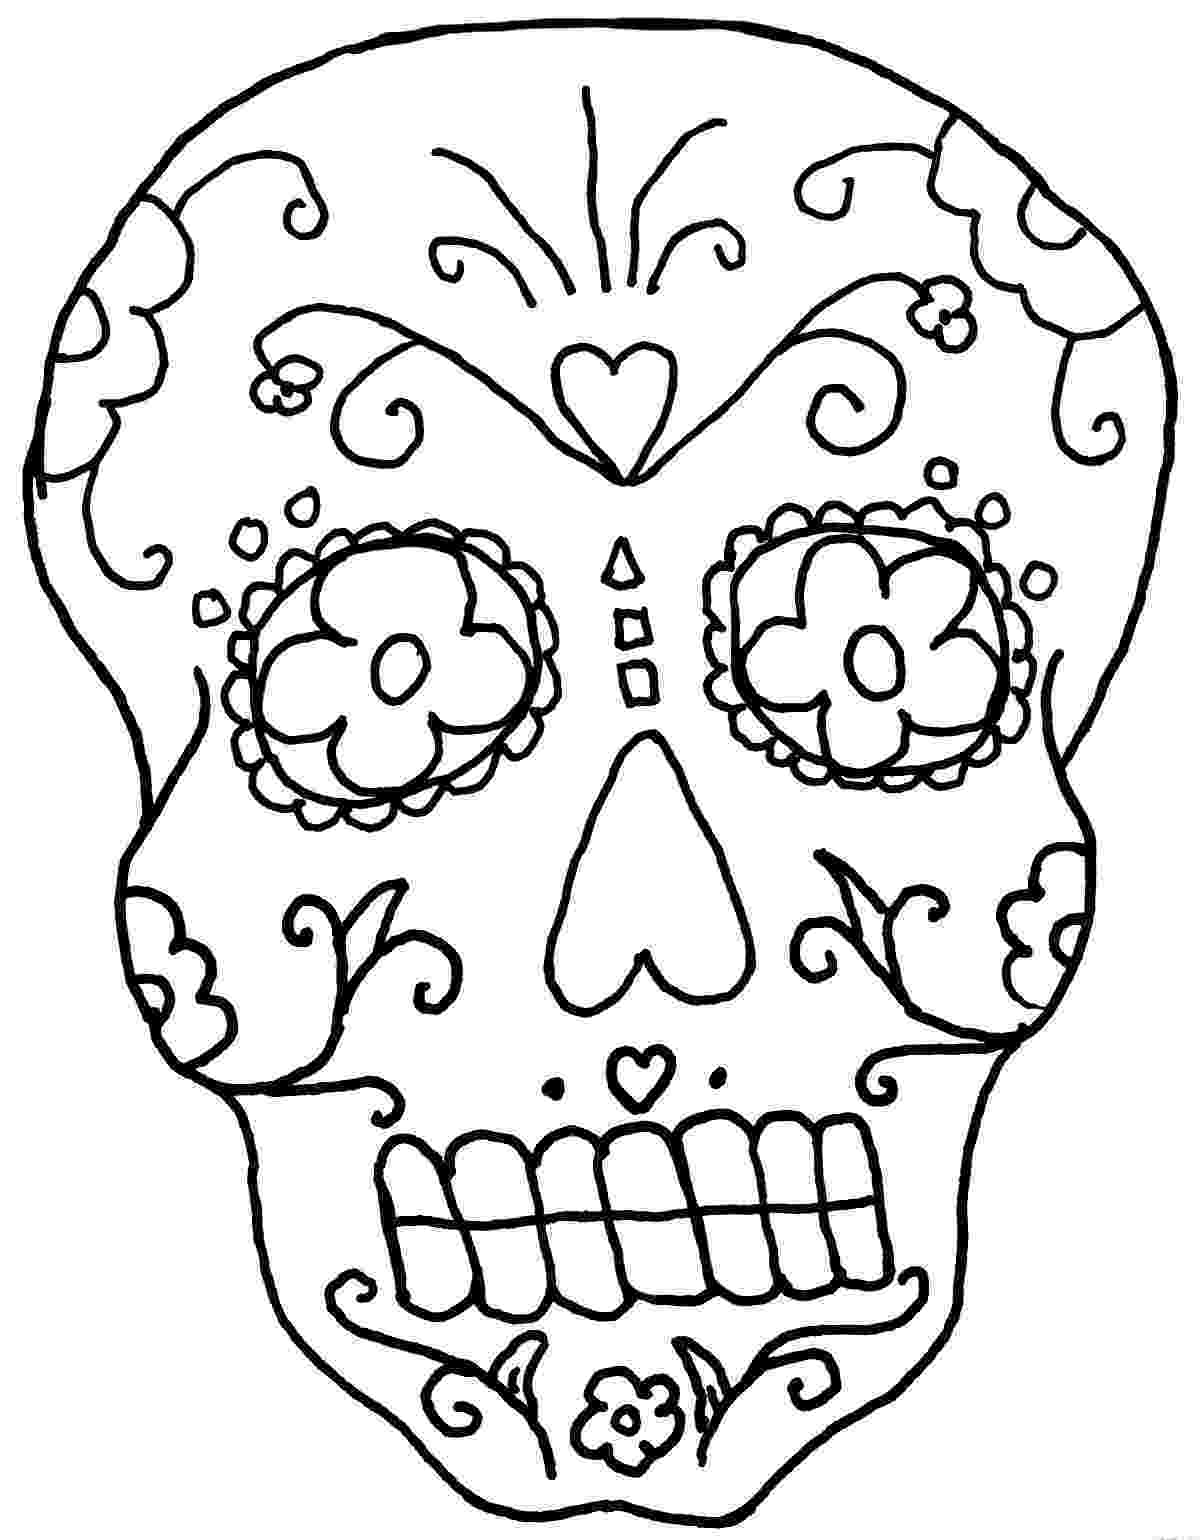 coloring pages for adults day of the dead day of the dead adult coloring pages with sugar skulls coloring dead pages of adults for the day 